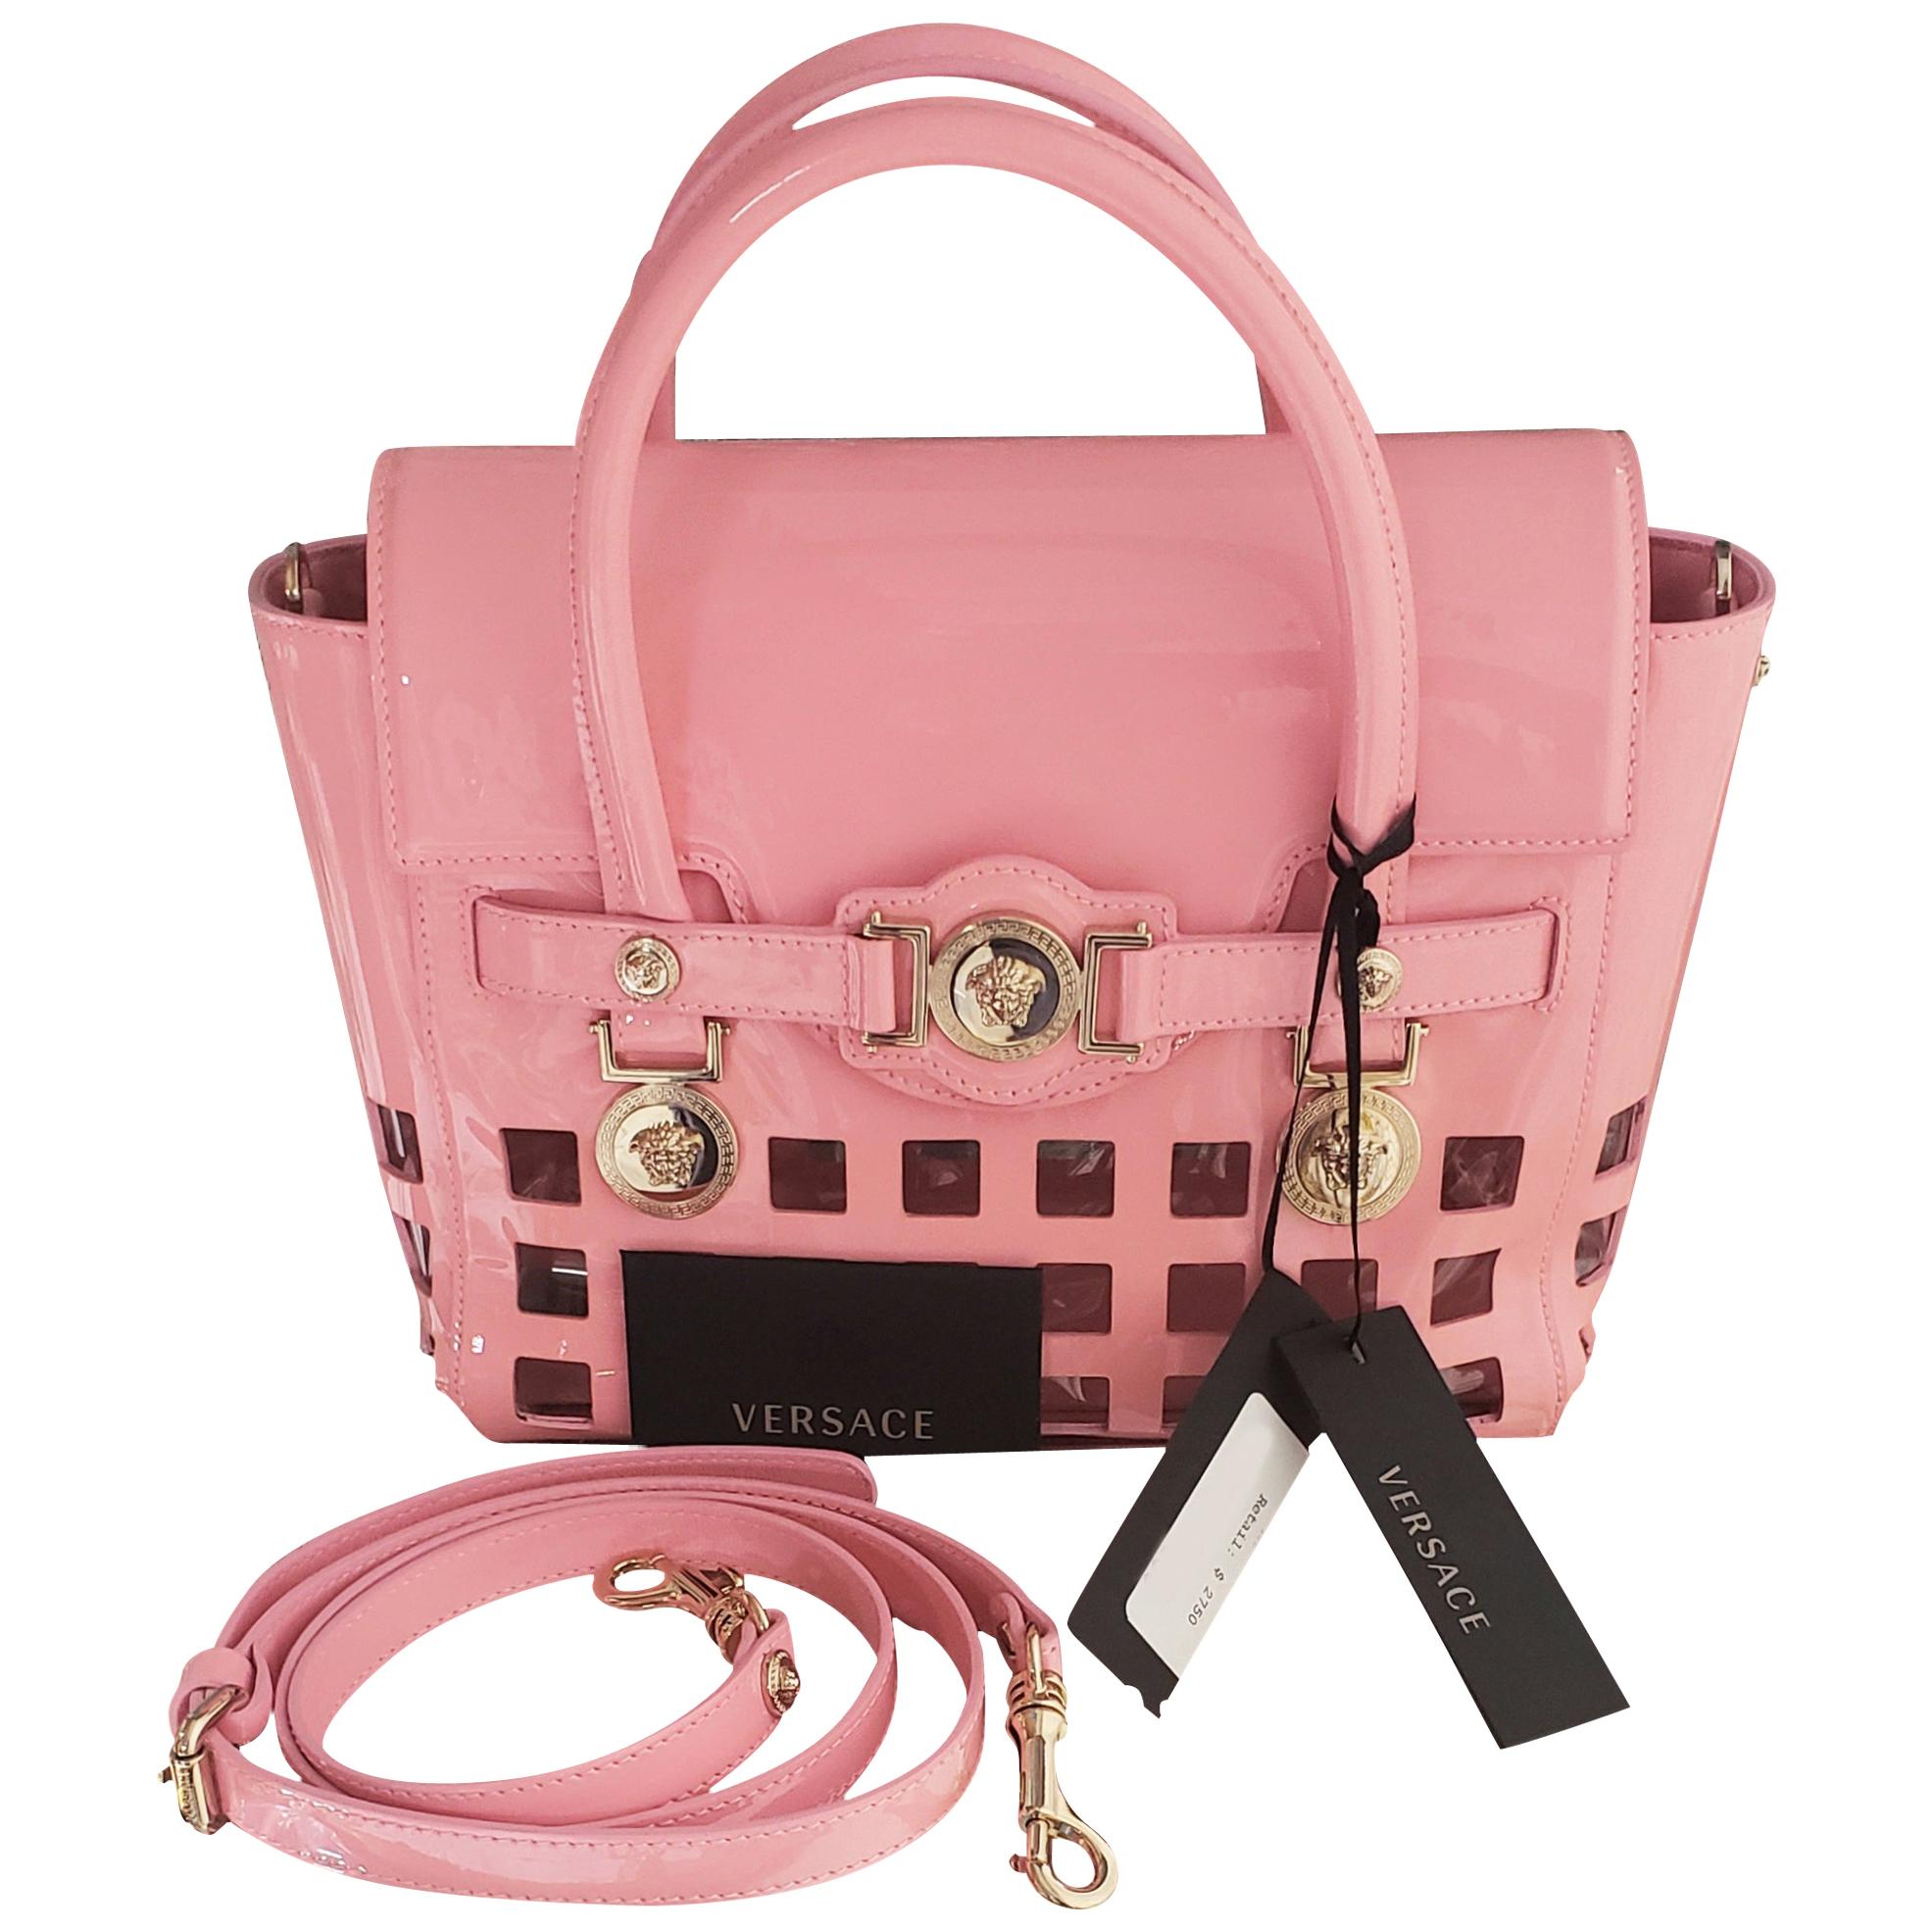 S/S 2015 look # 11 VERSACE PERFORATED PATENT PINK LEATHER BAG For Sale